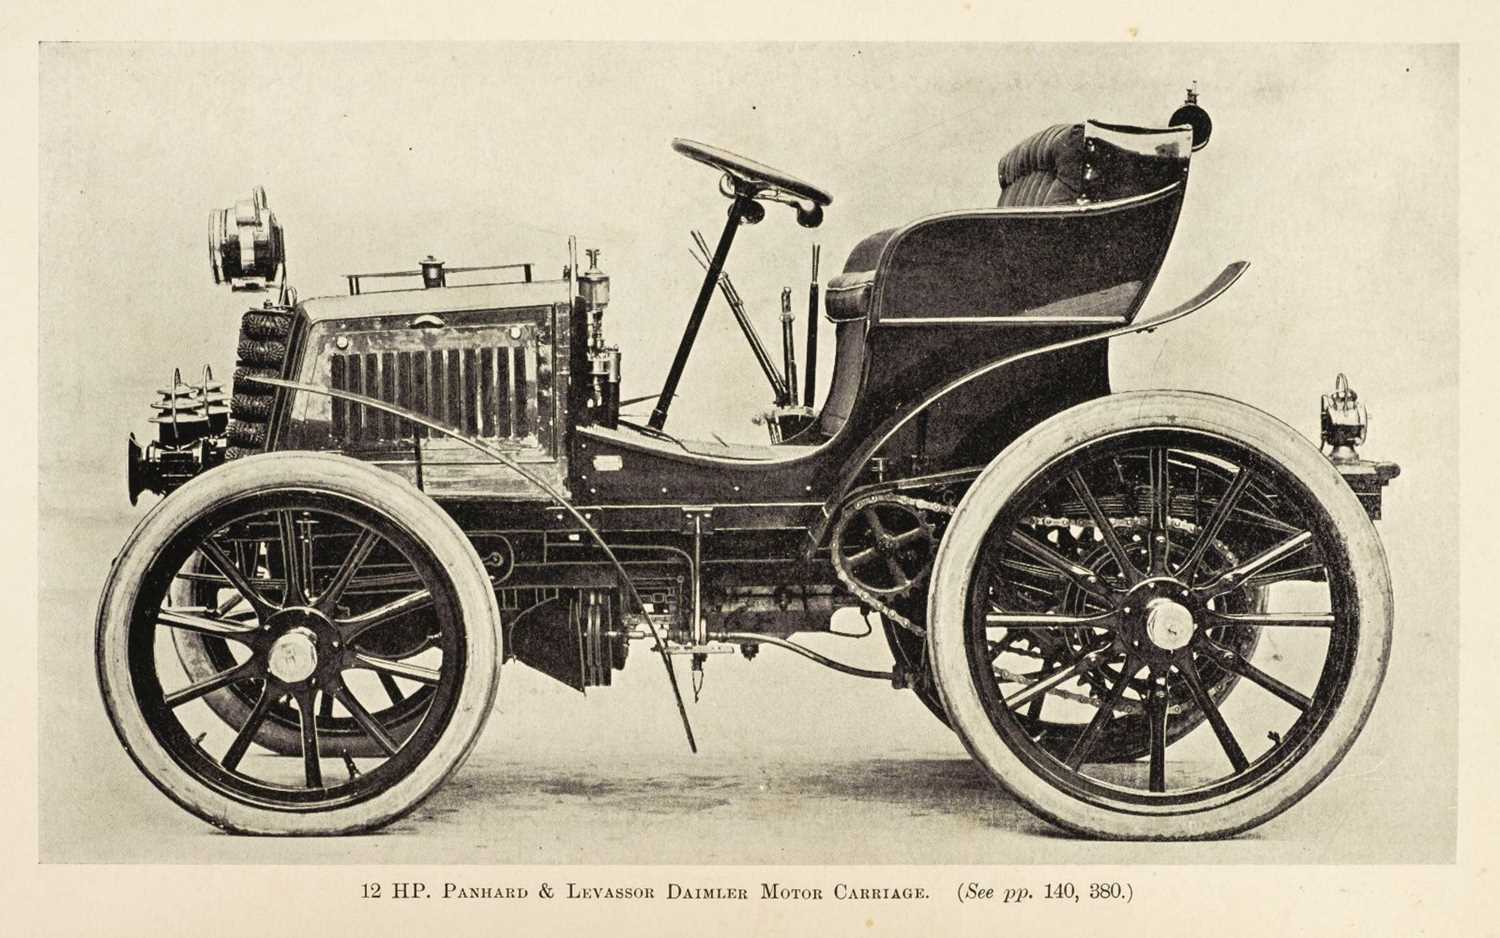 Lot 46 - Beaumont (W. Worby). Motor Vehicles and Motors, 1900, & 1 other